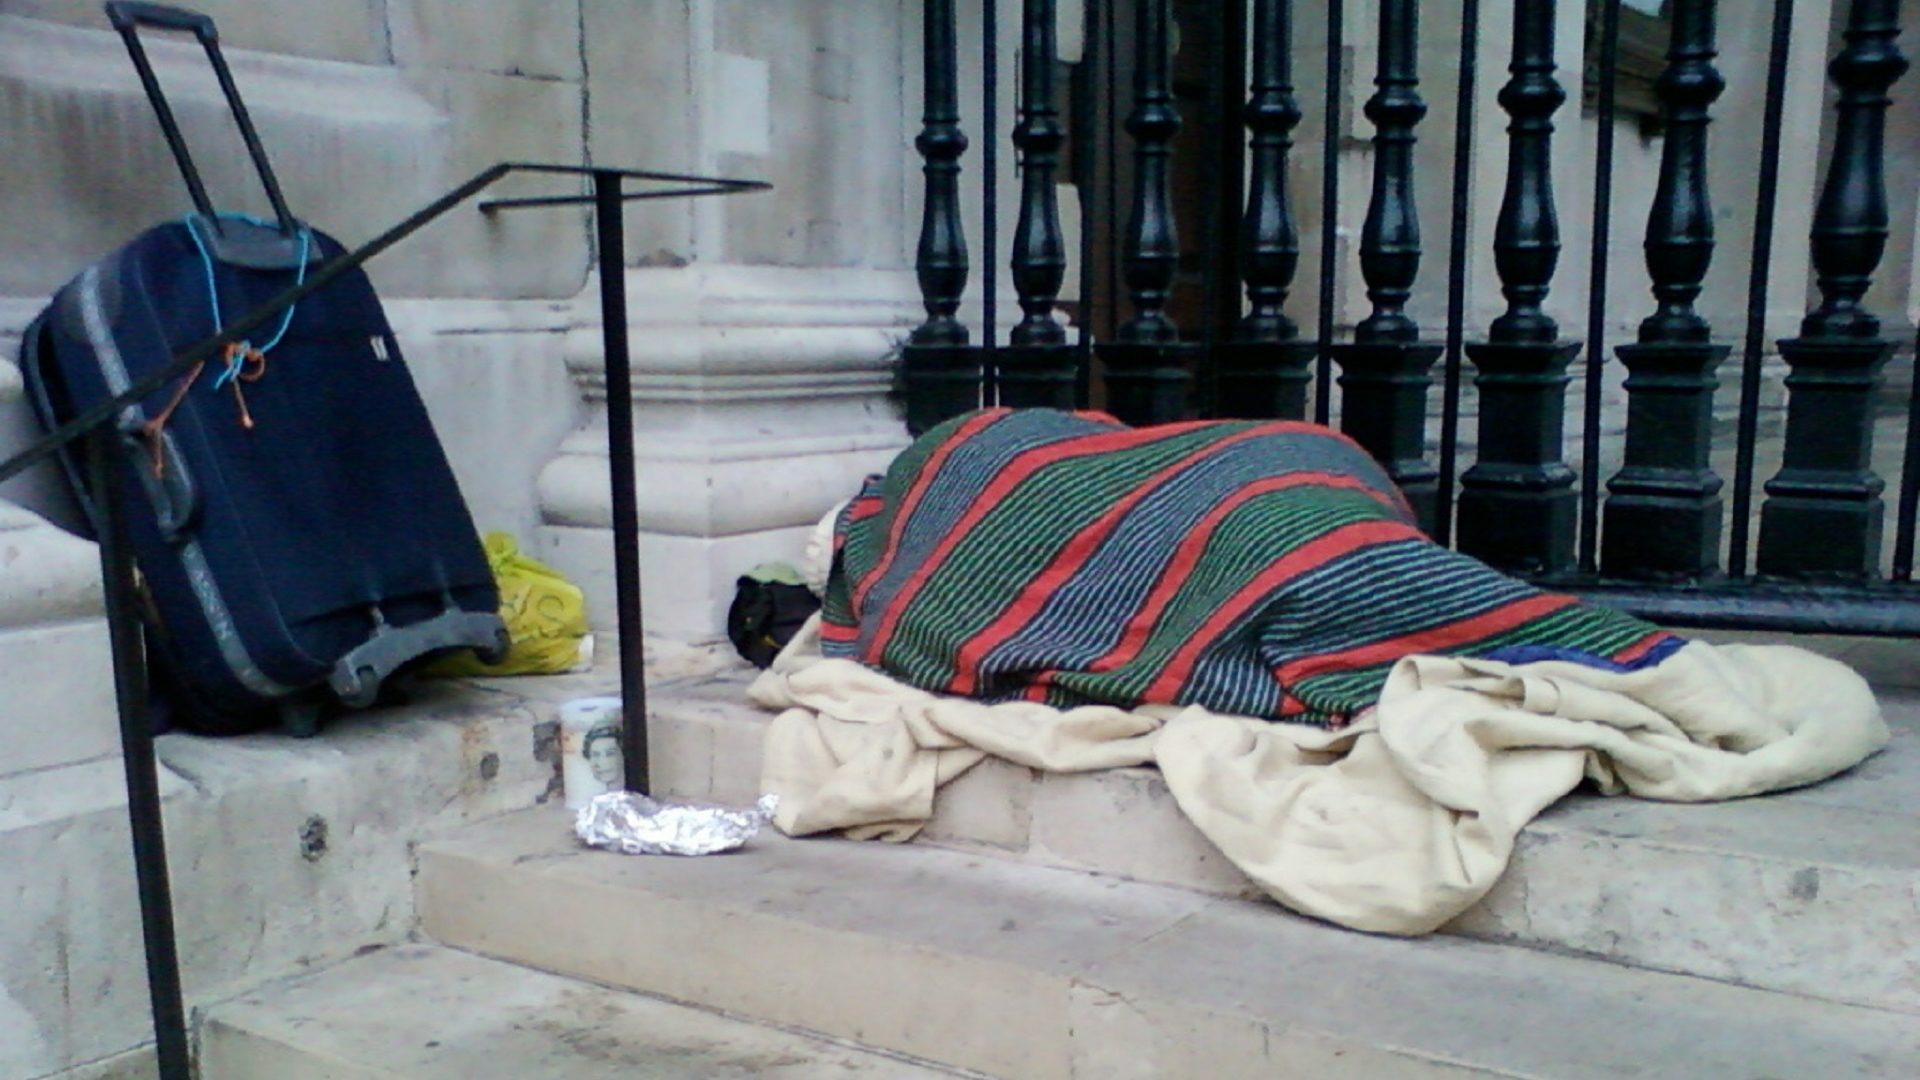 rough sleeper experiencing homelessness in London